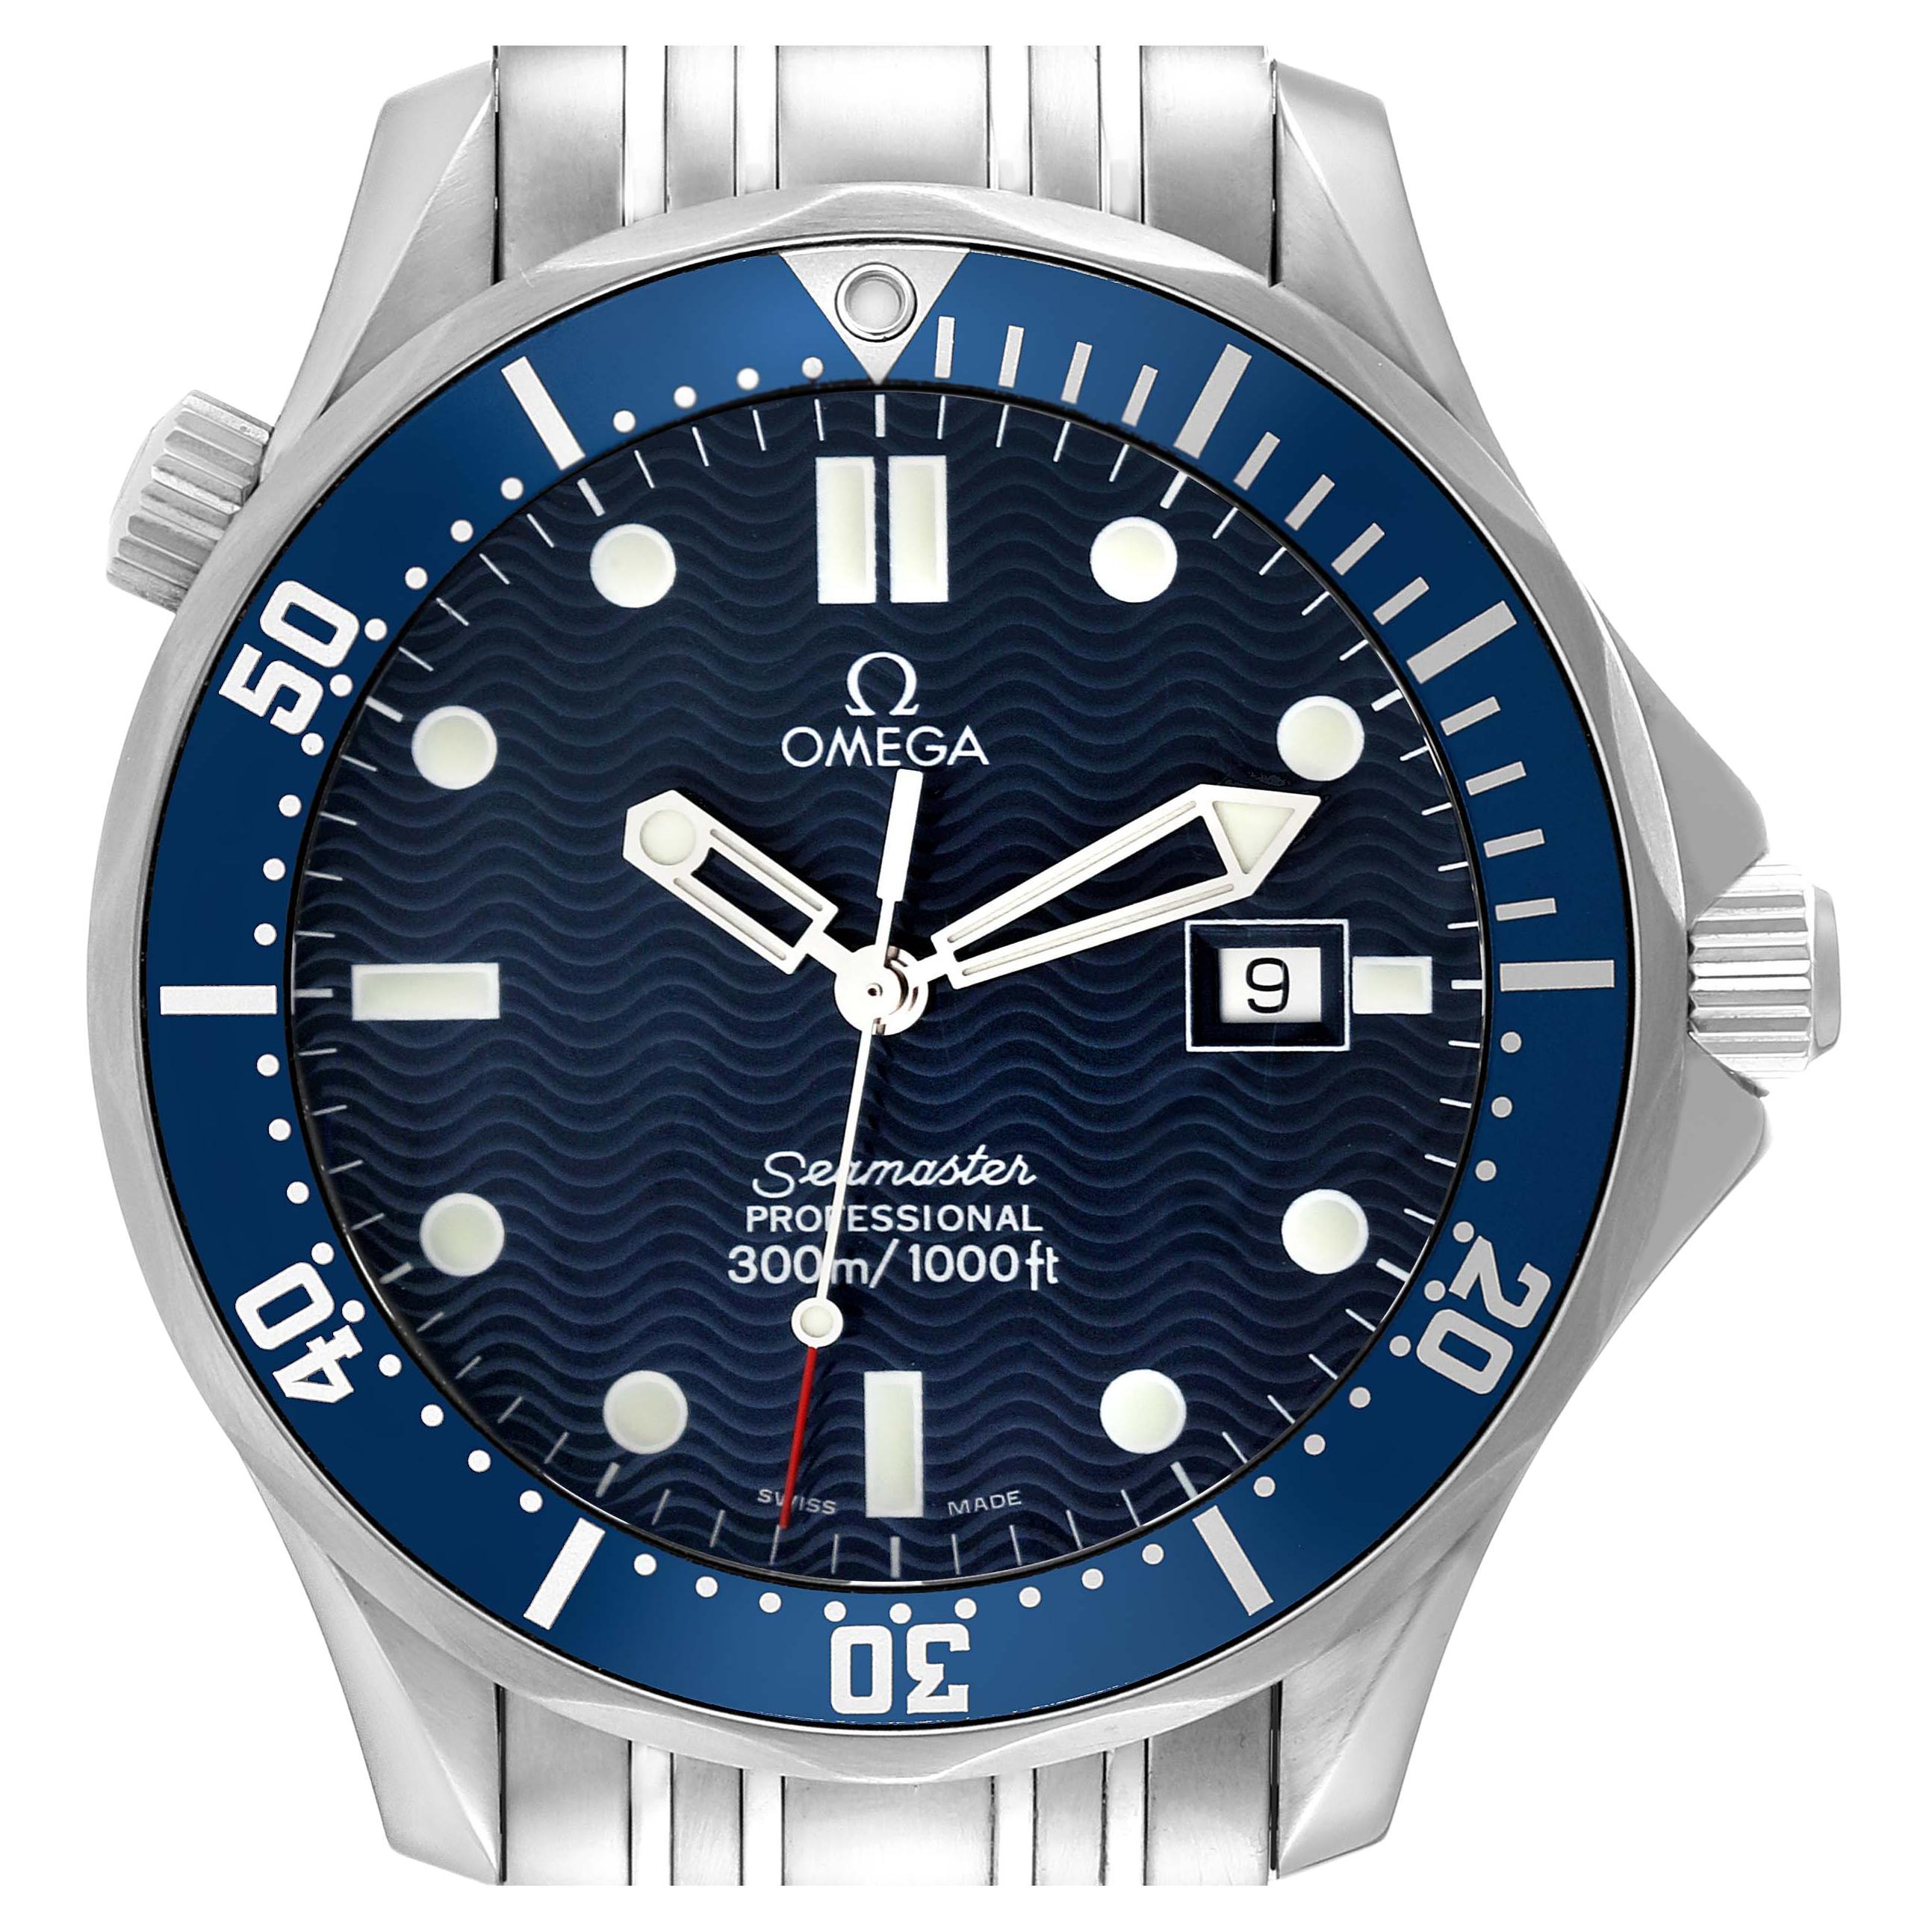 Omega Seamaster Diver James Bond Steel Mens Watch 2541.80.00 Box Papers